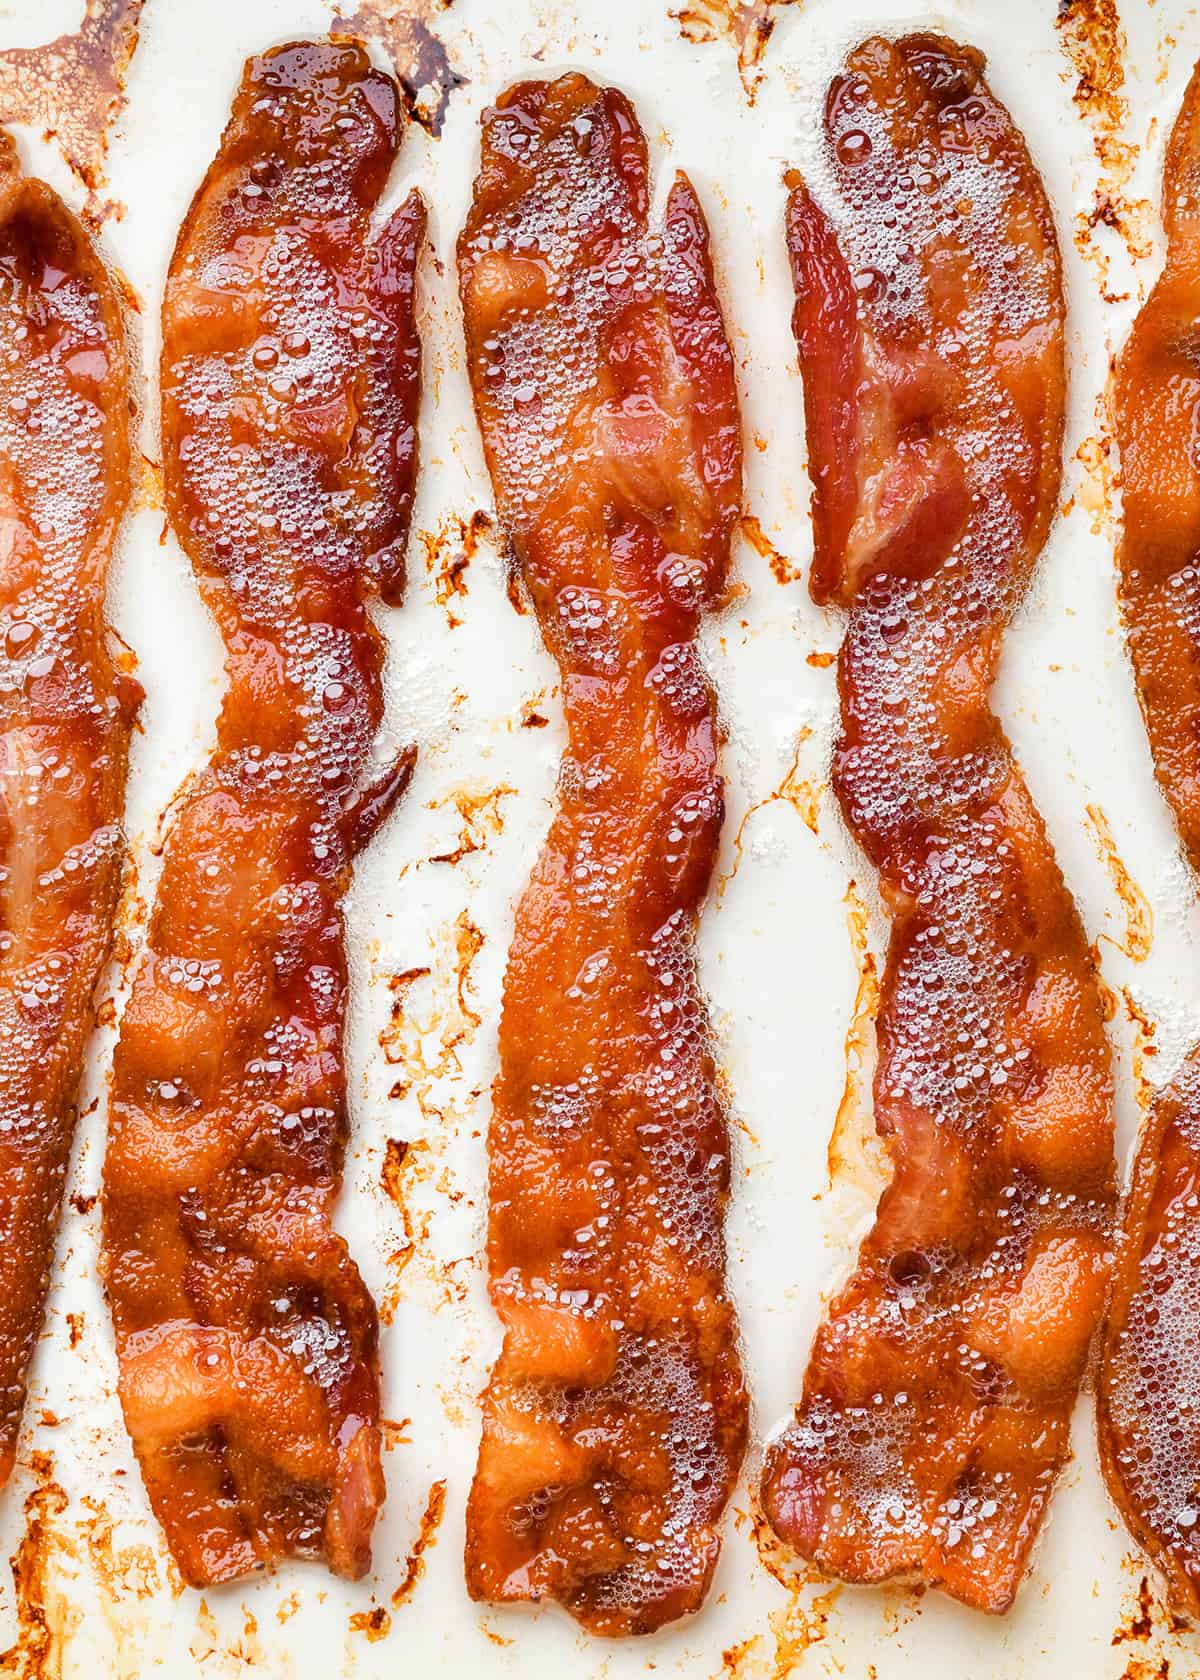 Oven Baked Bacon on a baking sheet after baking